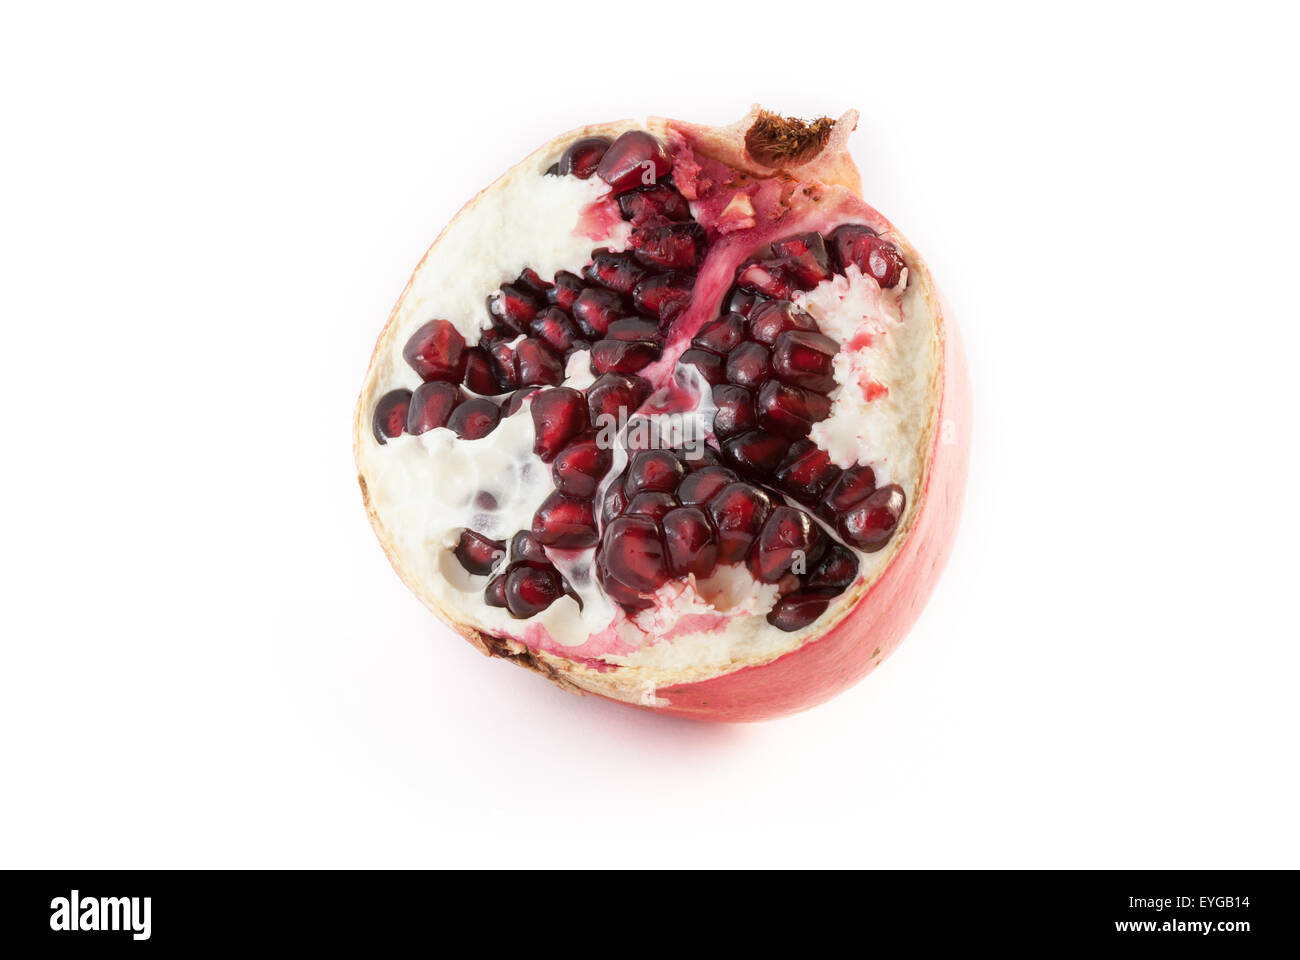 pomegranate red  broken in half  isolated on white background Stock Photo